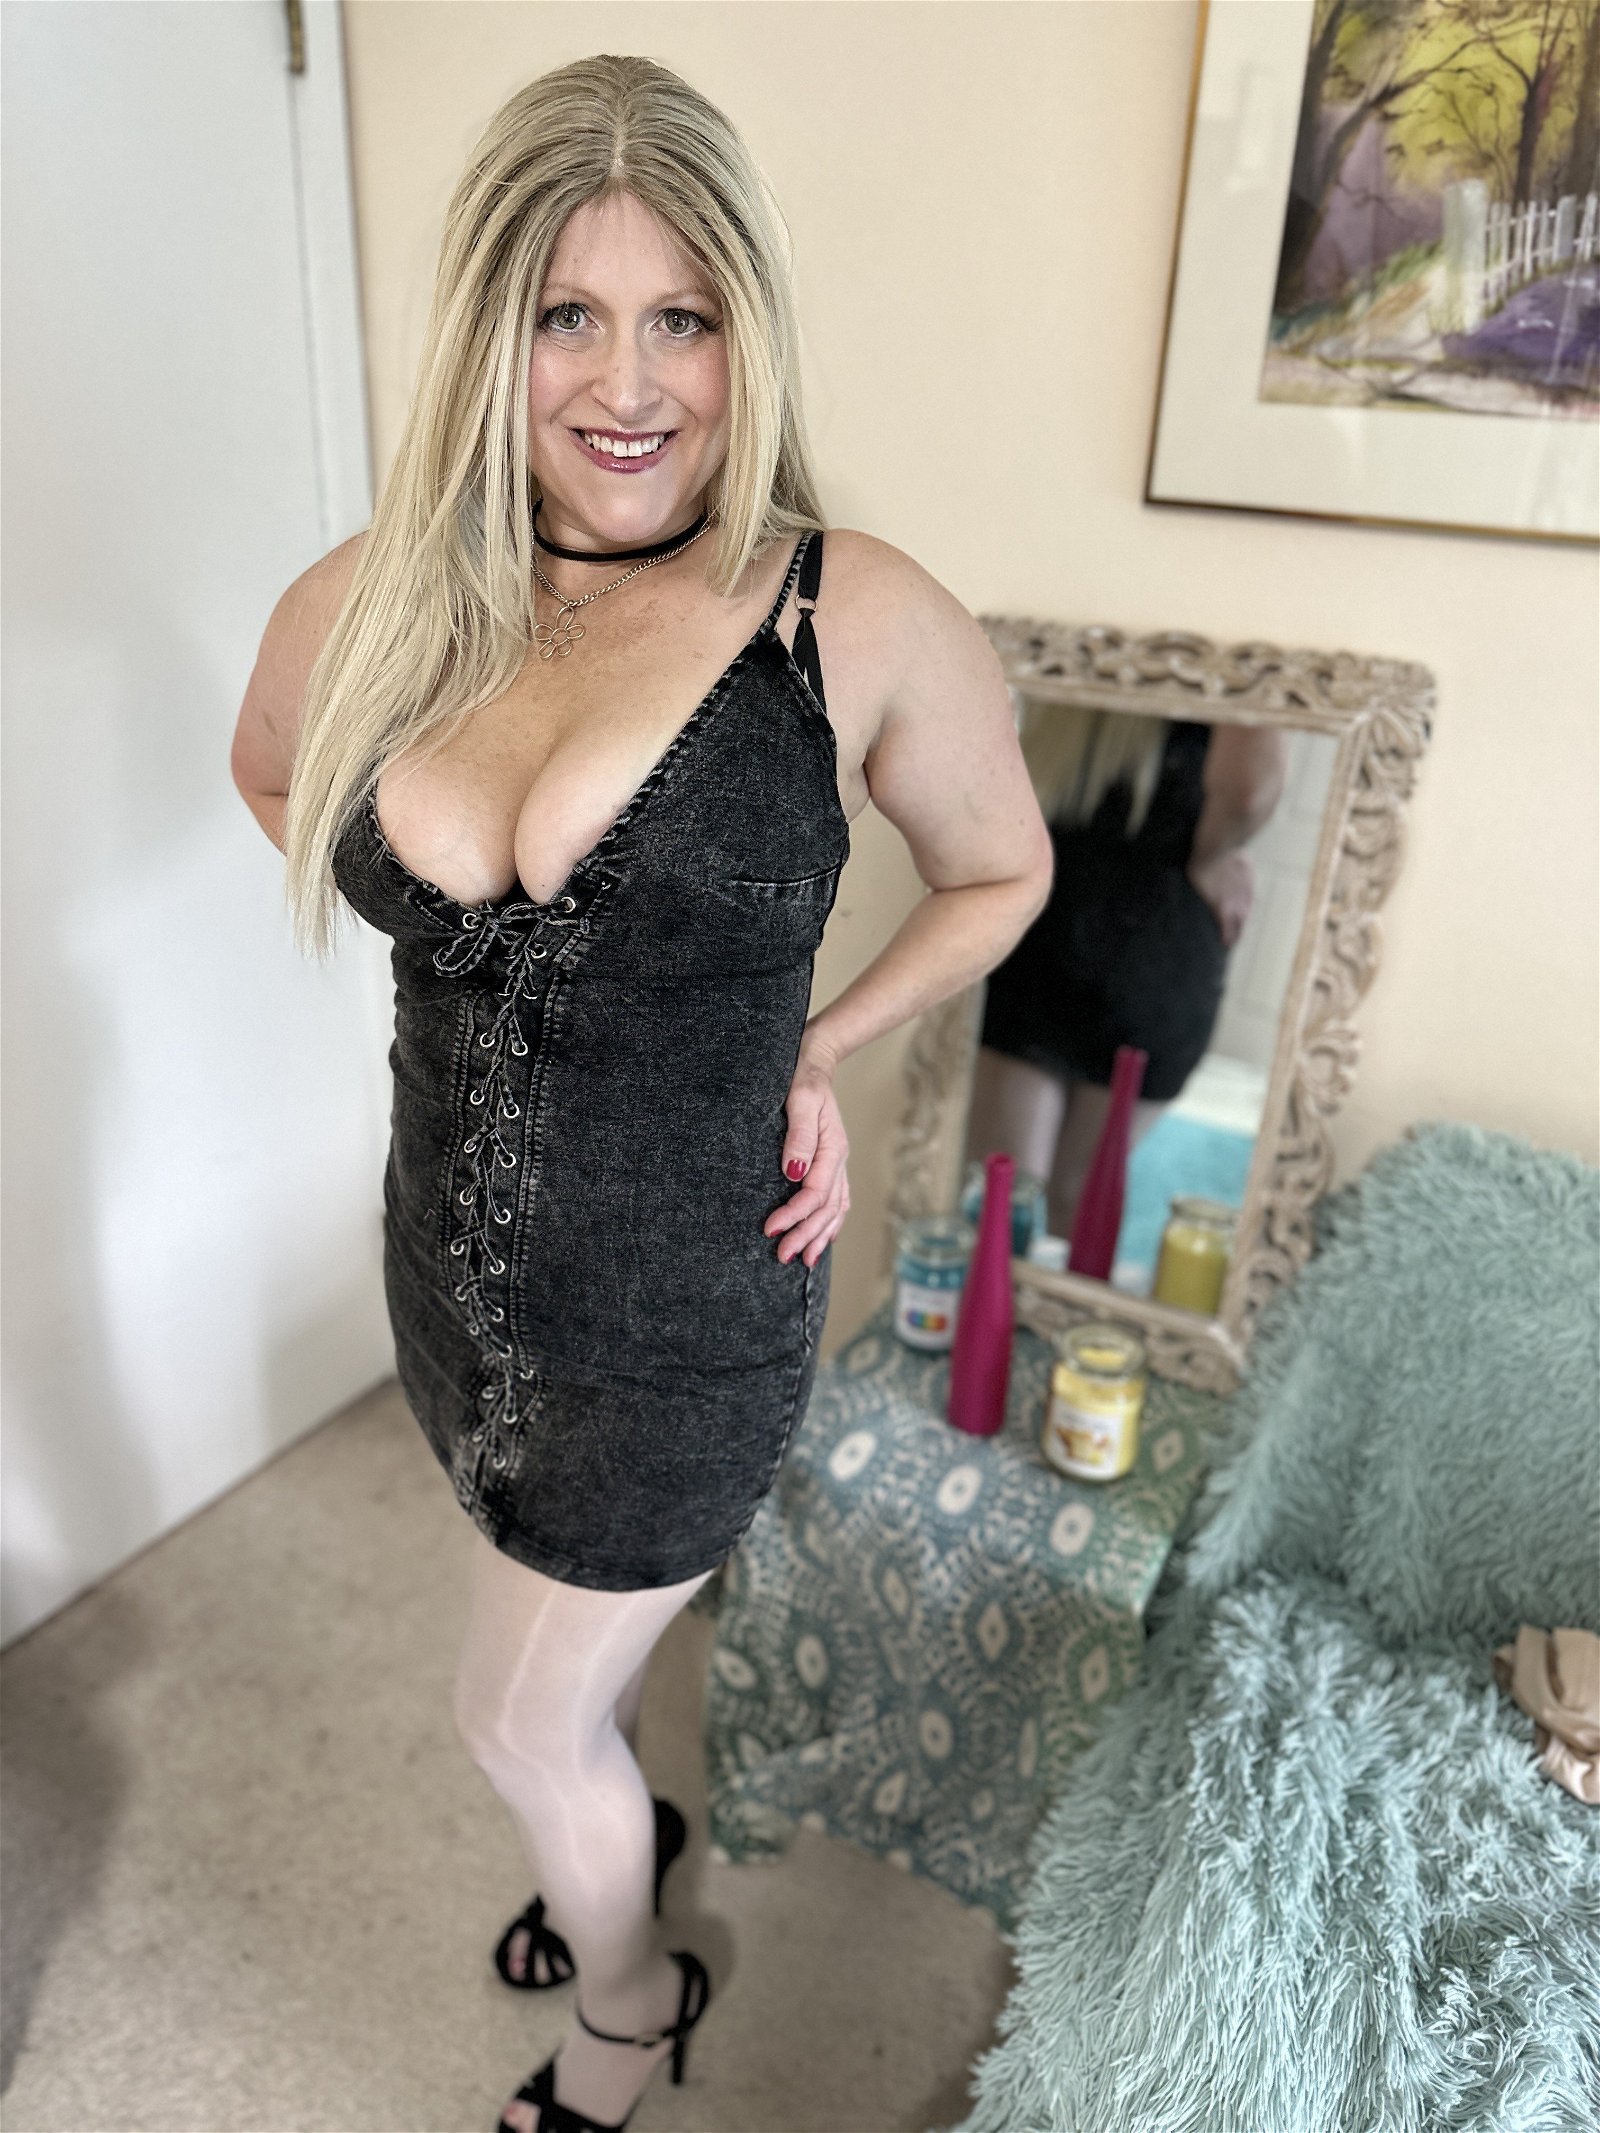 Photo by tabithaxxx with the username @tabithaxxx, who is a star user,  August 12, 2023 at 9:45 PM. The post is about the topic MILF and the text says 'Sexy Black Denim Dress and Pantyhose - #pantyhose #milf #highheels #heels #blonde #sexy #cute #babe #curvy #mature #cougar https://allmylinks.com/tabithaxxx'